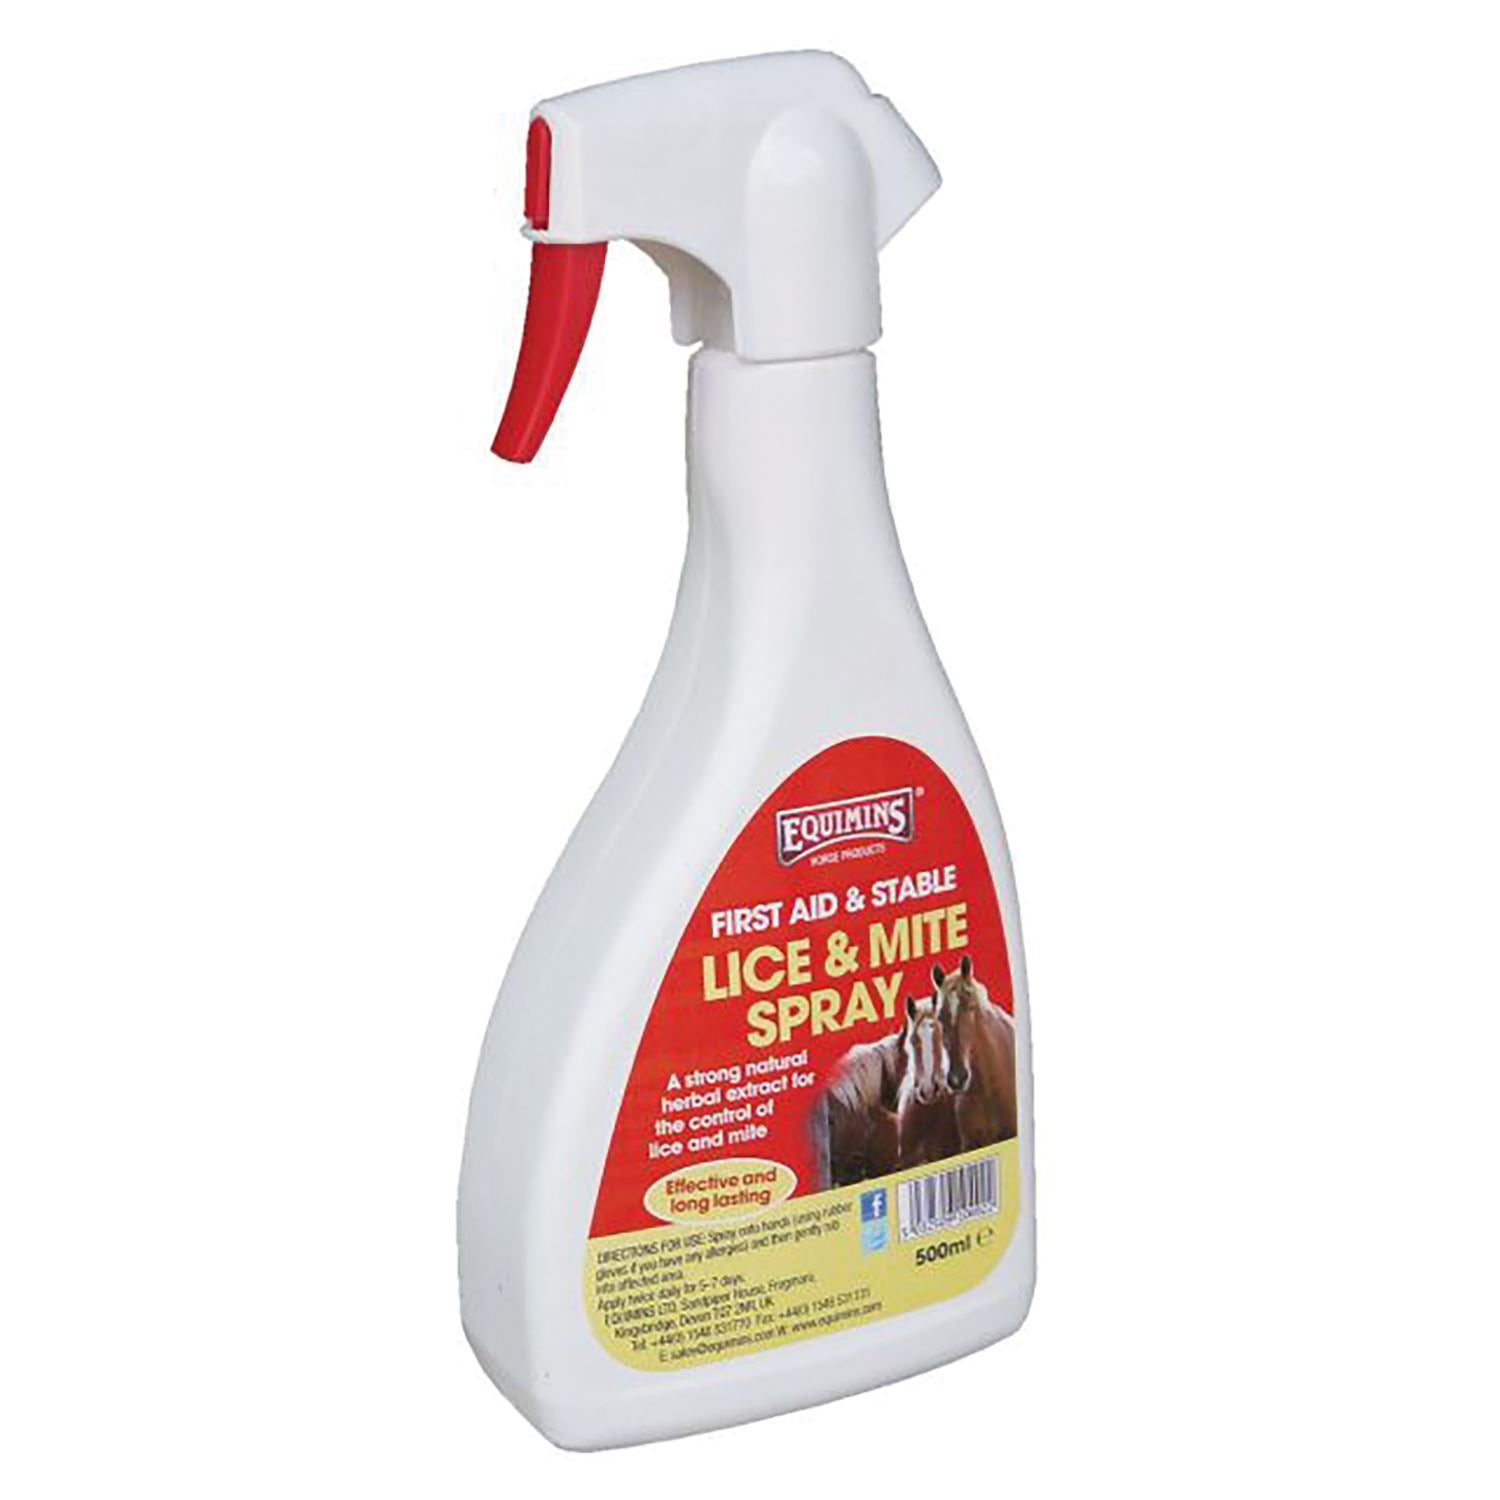 Equimins Lice & Mite Spray - A natural solution for lice and mites control